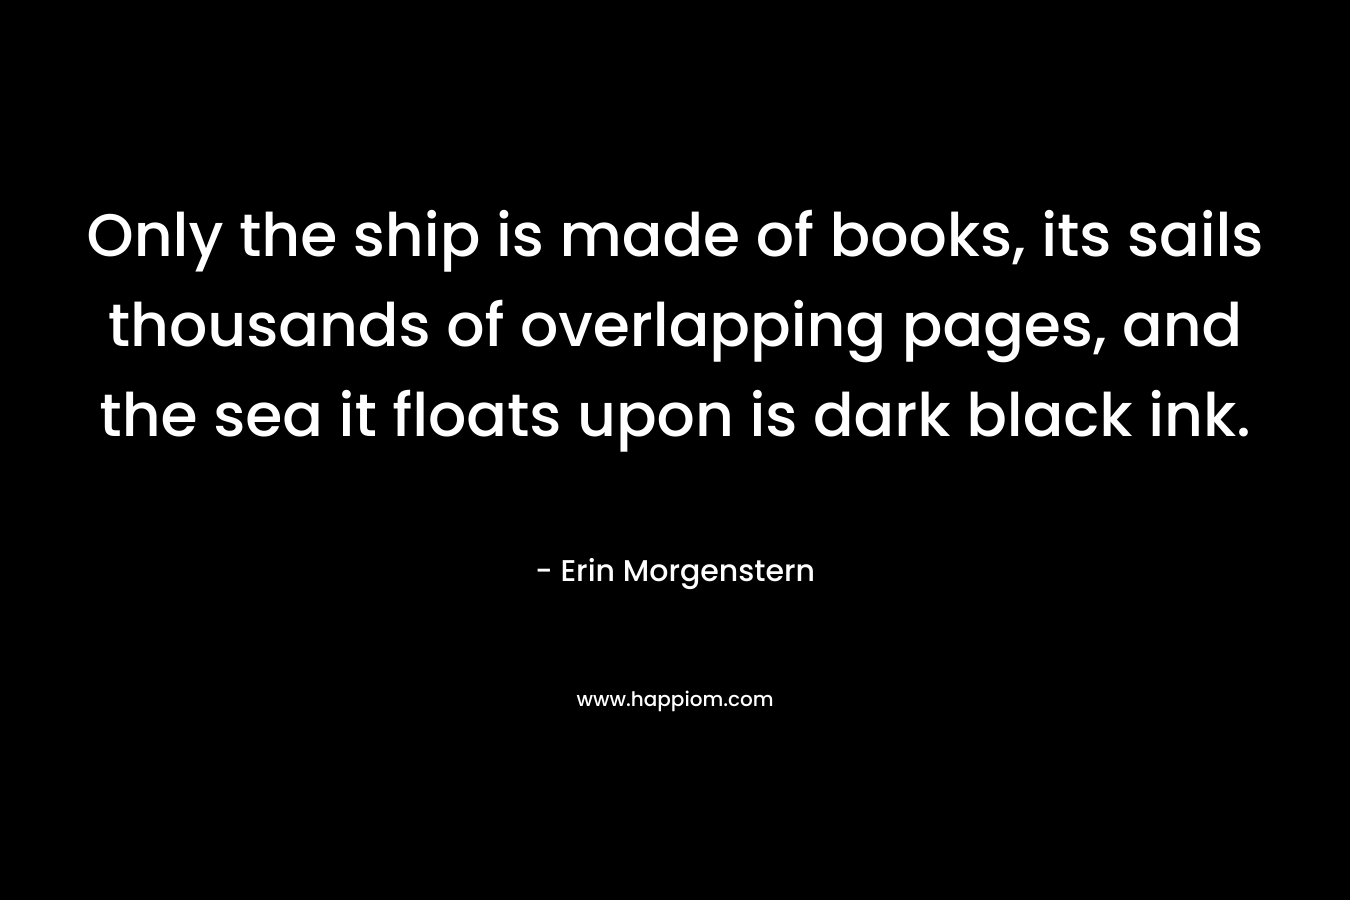 Only the ship is made of books, its sails thousands of overlapping pages, and the sea it floats upon is dark black ink.